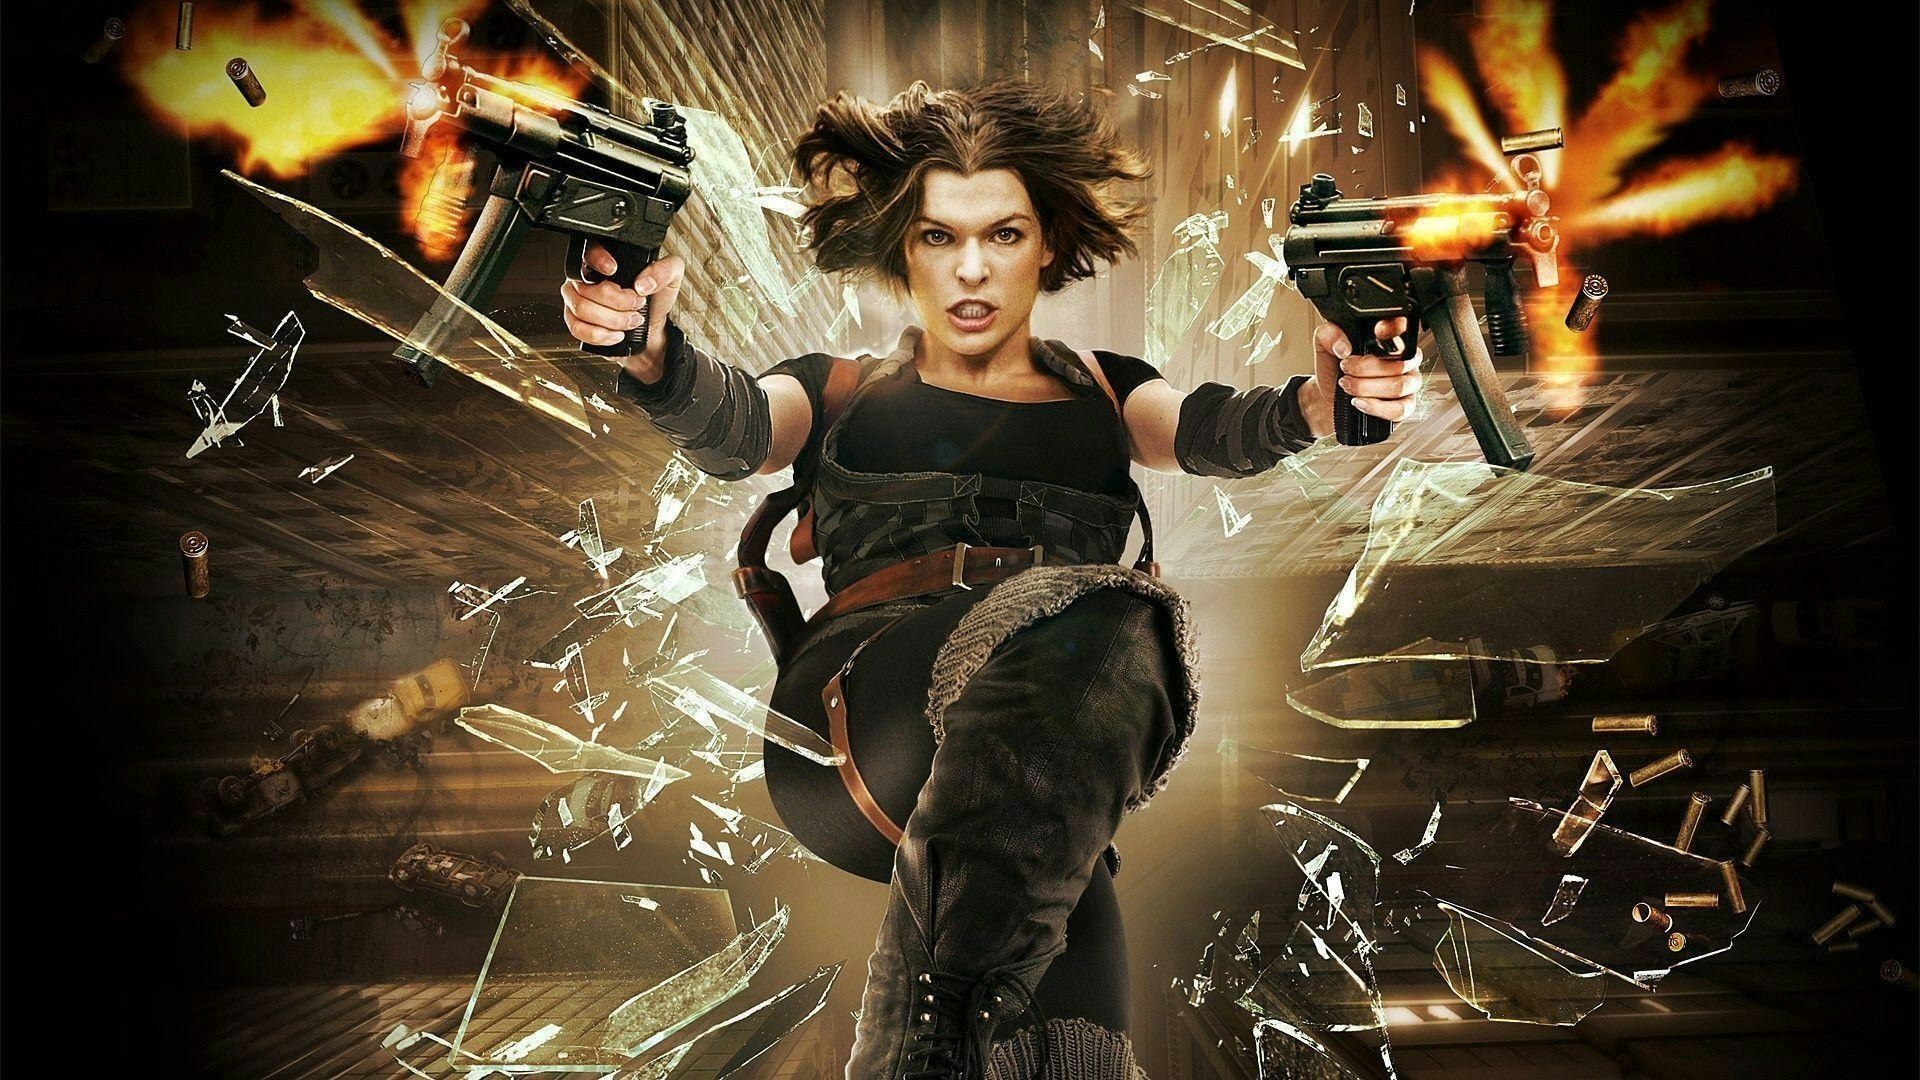 Resident Evil: The Final Chapter box office collection